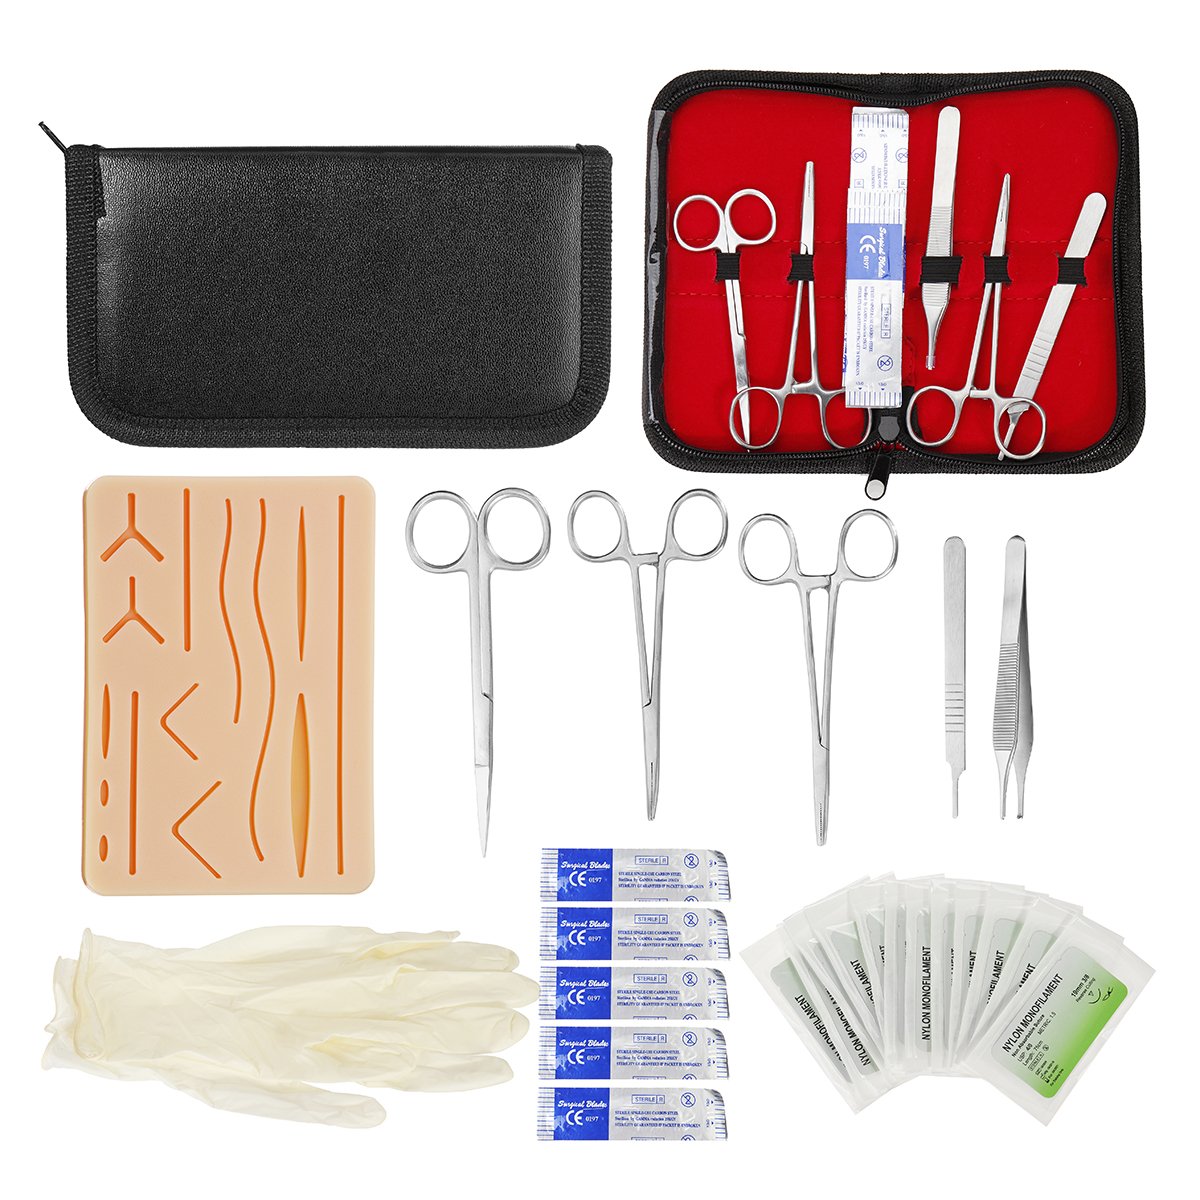 25 In 1 Medical Skin Suture Surgical Training Kit Silicone Pad Needle Scissors 1